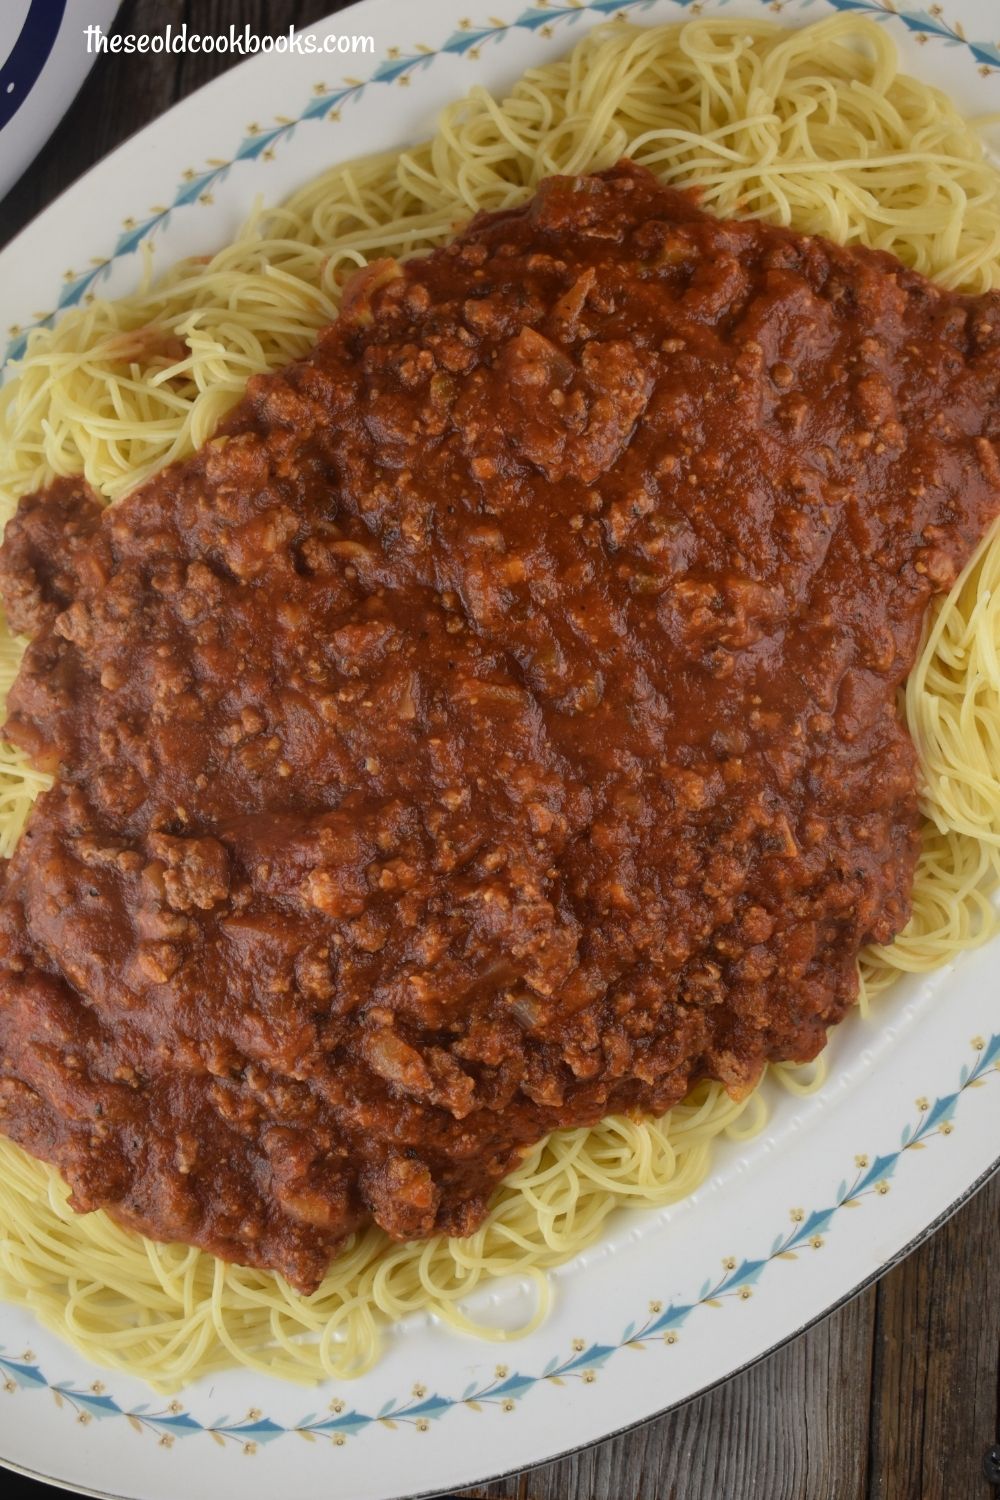 This Slow Cooker Spaghetti Sauce is full of flavor and hearty, featuring ground beef and sausage. Just throw the ingredients in the crock pot and enjoy.